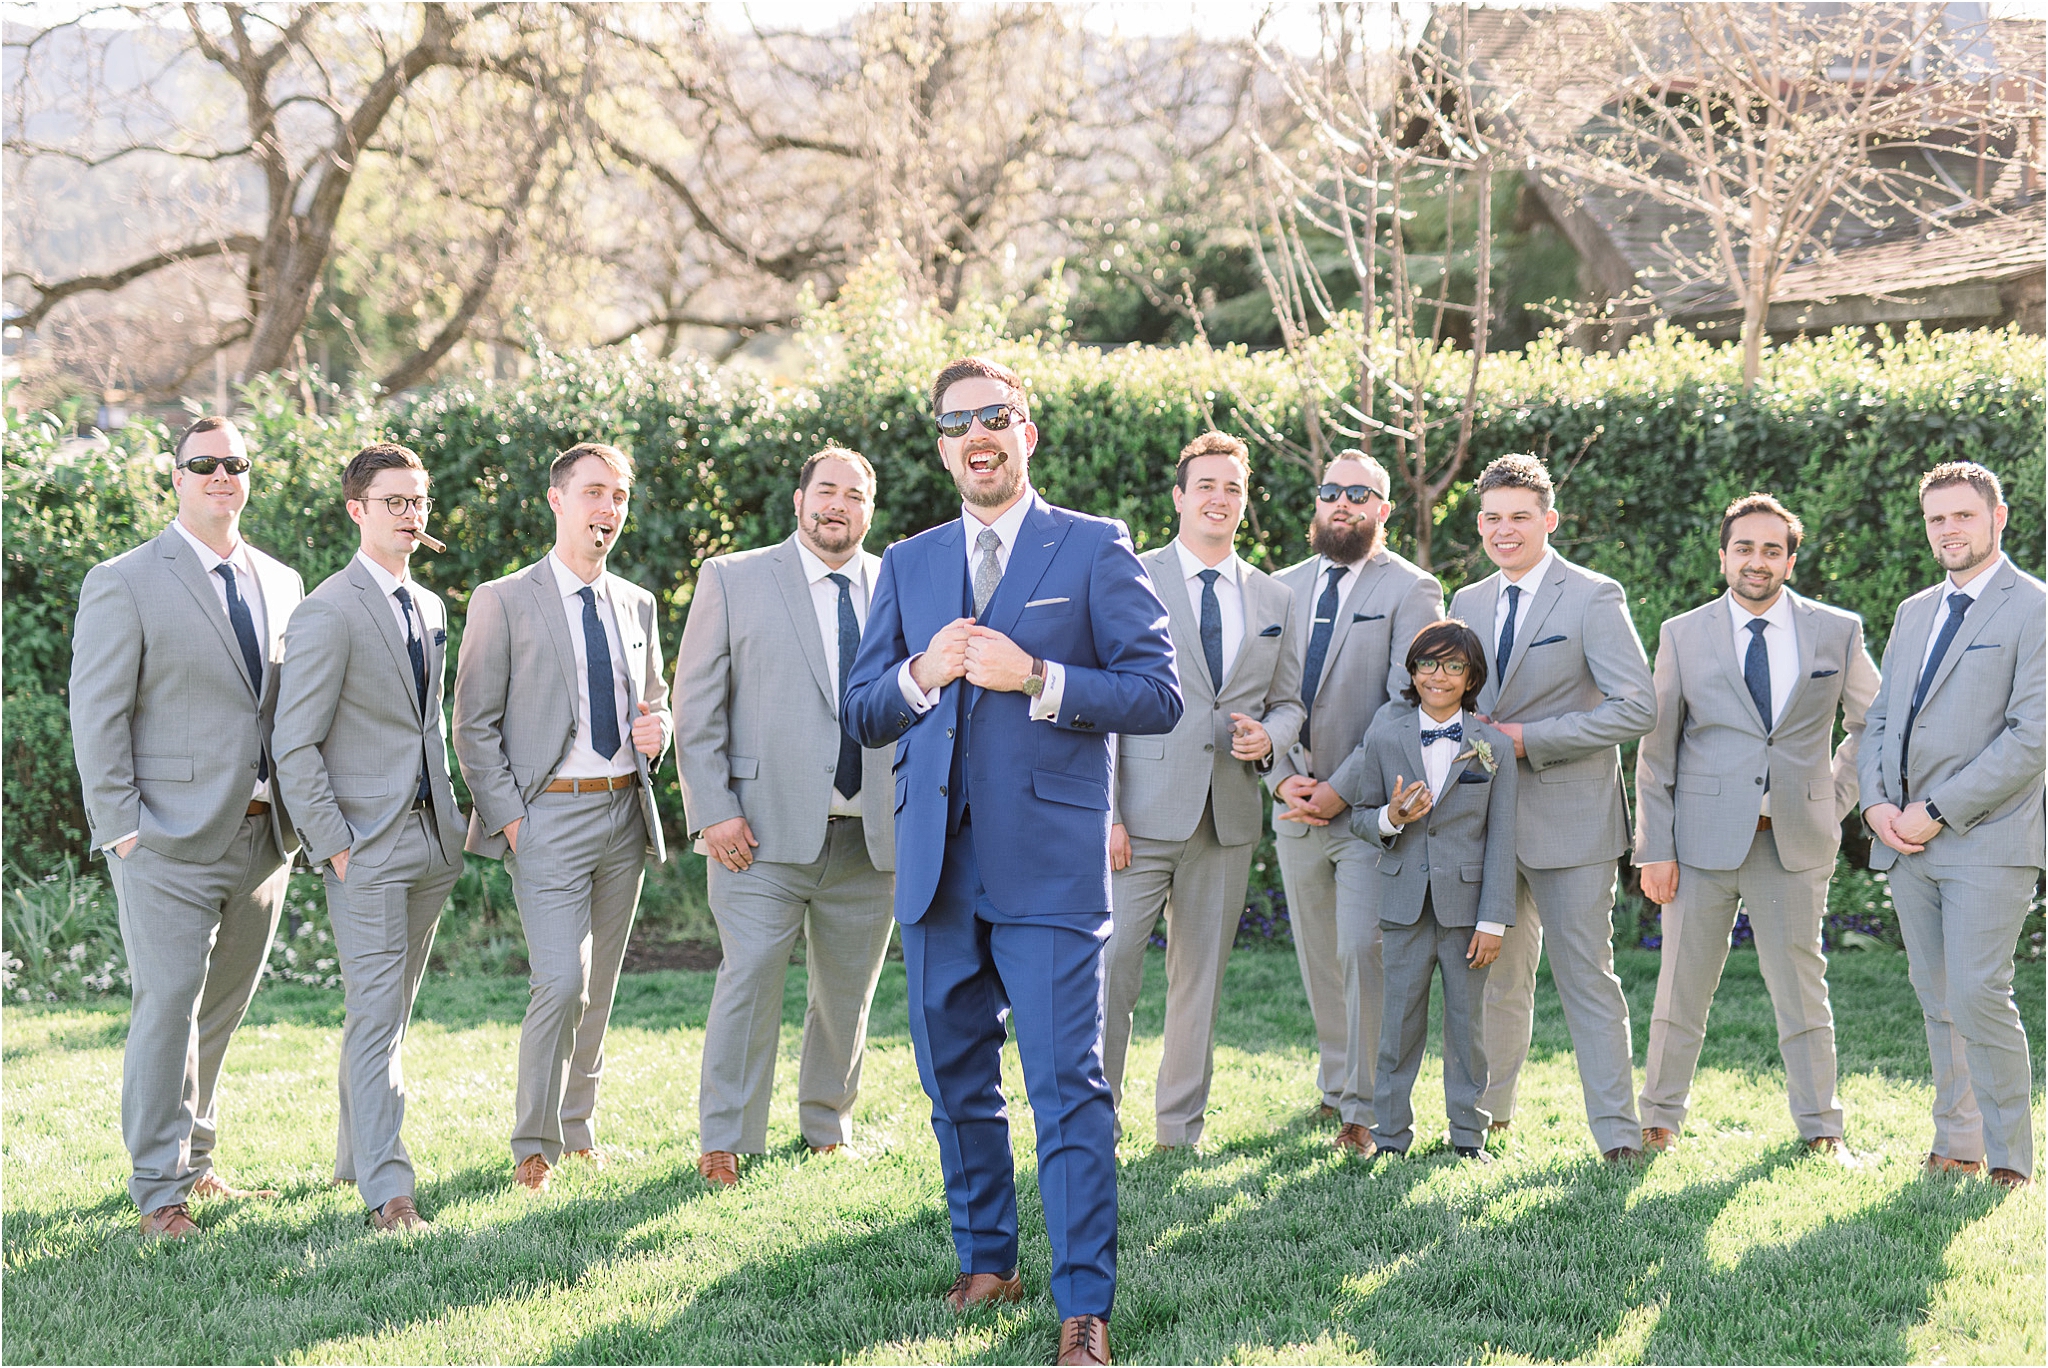 V. Sattui Winery Wedding | Napa Valley, CA | Annie and Pablo bridal party photos | Napa Valley Wedding Photographer | West End Photography